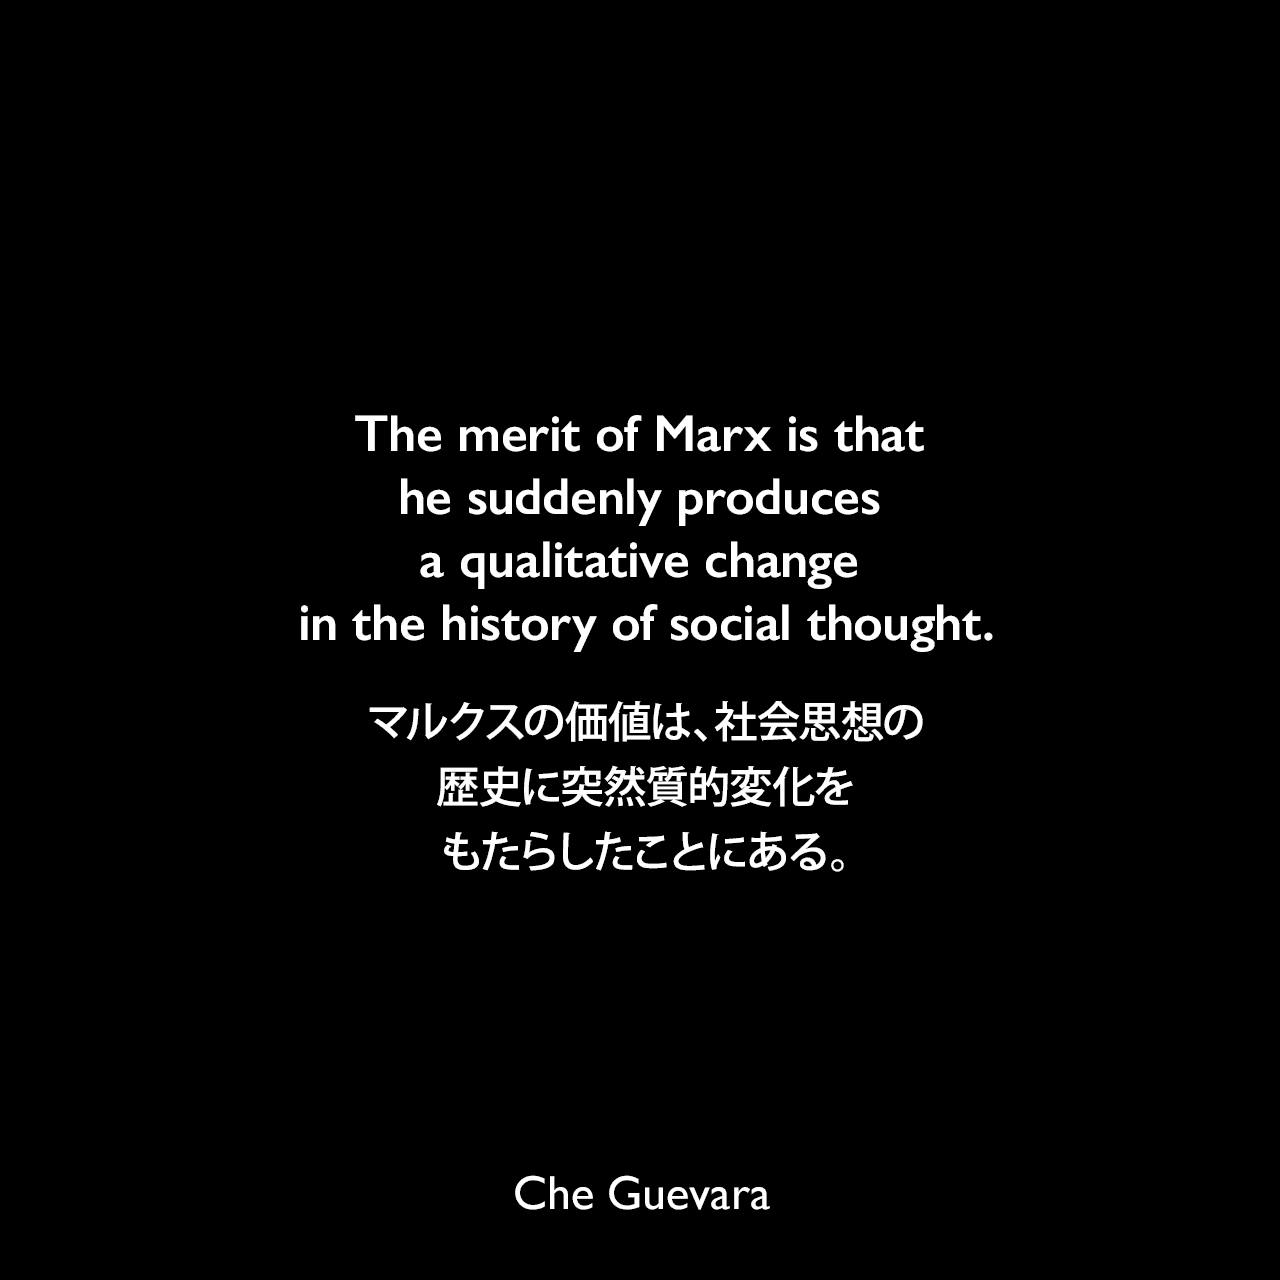 The merit of Marx is that he suddenly produces a qualitative change in the history of social thought.マルクスの価値は、社会思想の歴史に突然質的変化をもたらしたことにある。- 1960年10月8日 キューバ革命のイデオロギー研究に関する覚書よりChe Guevara